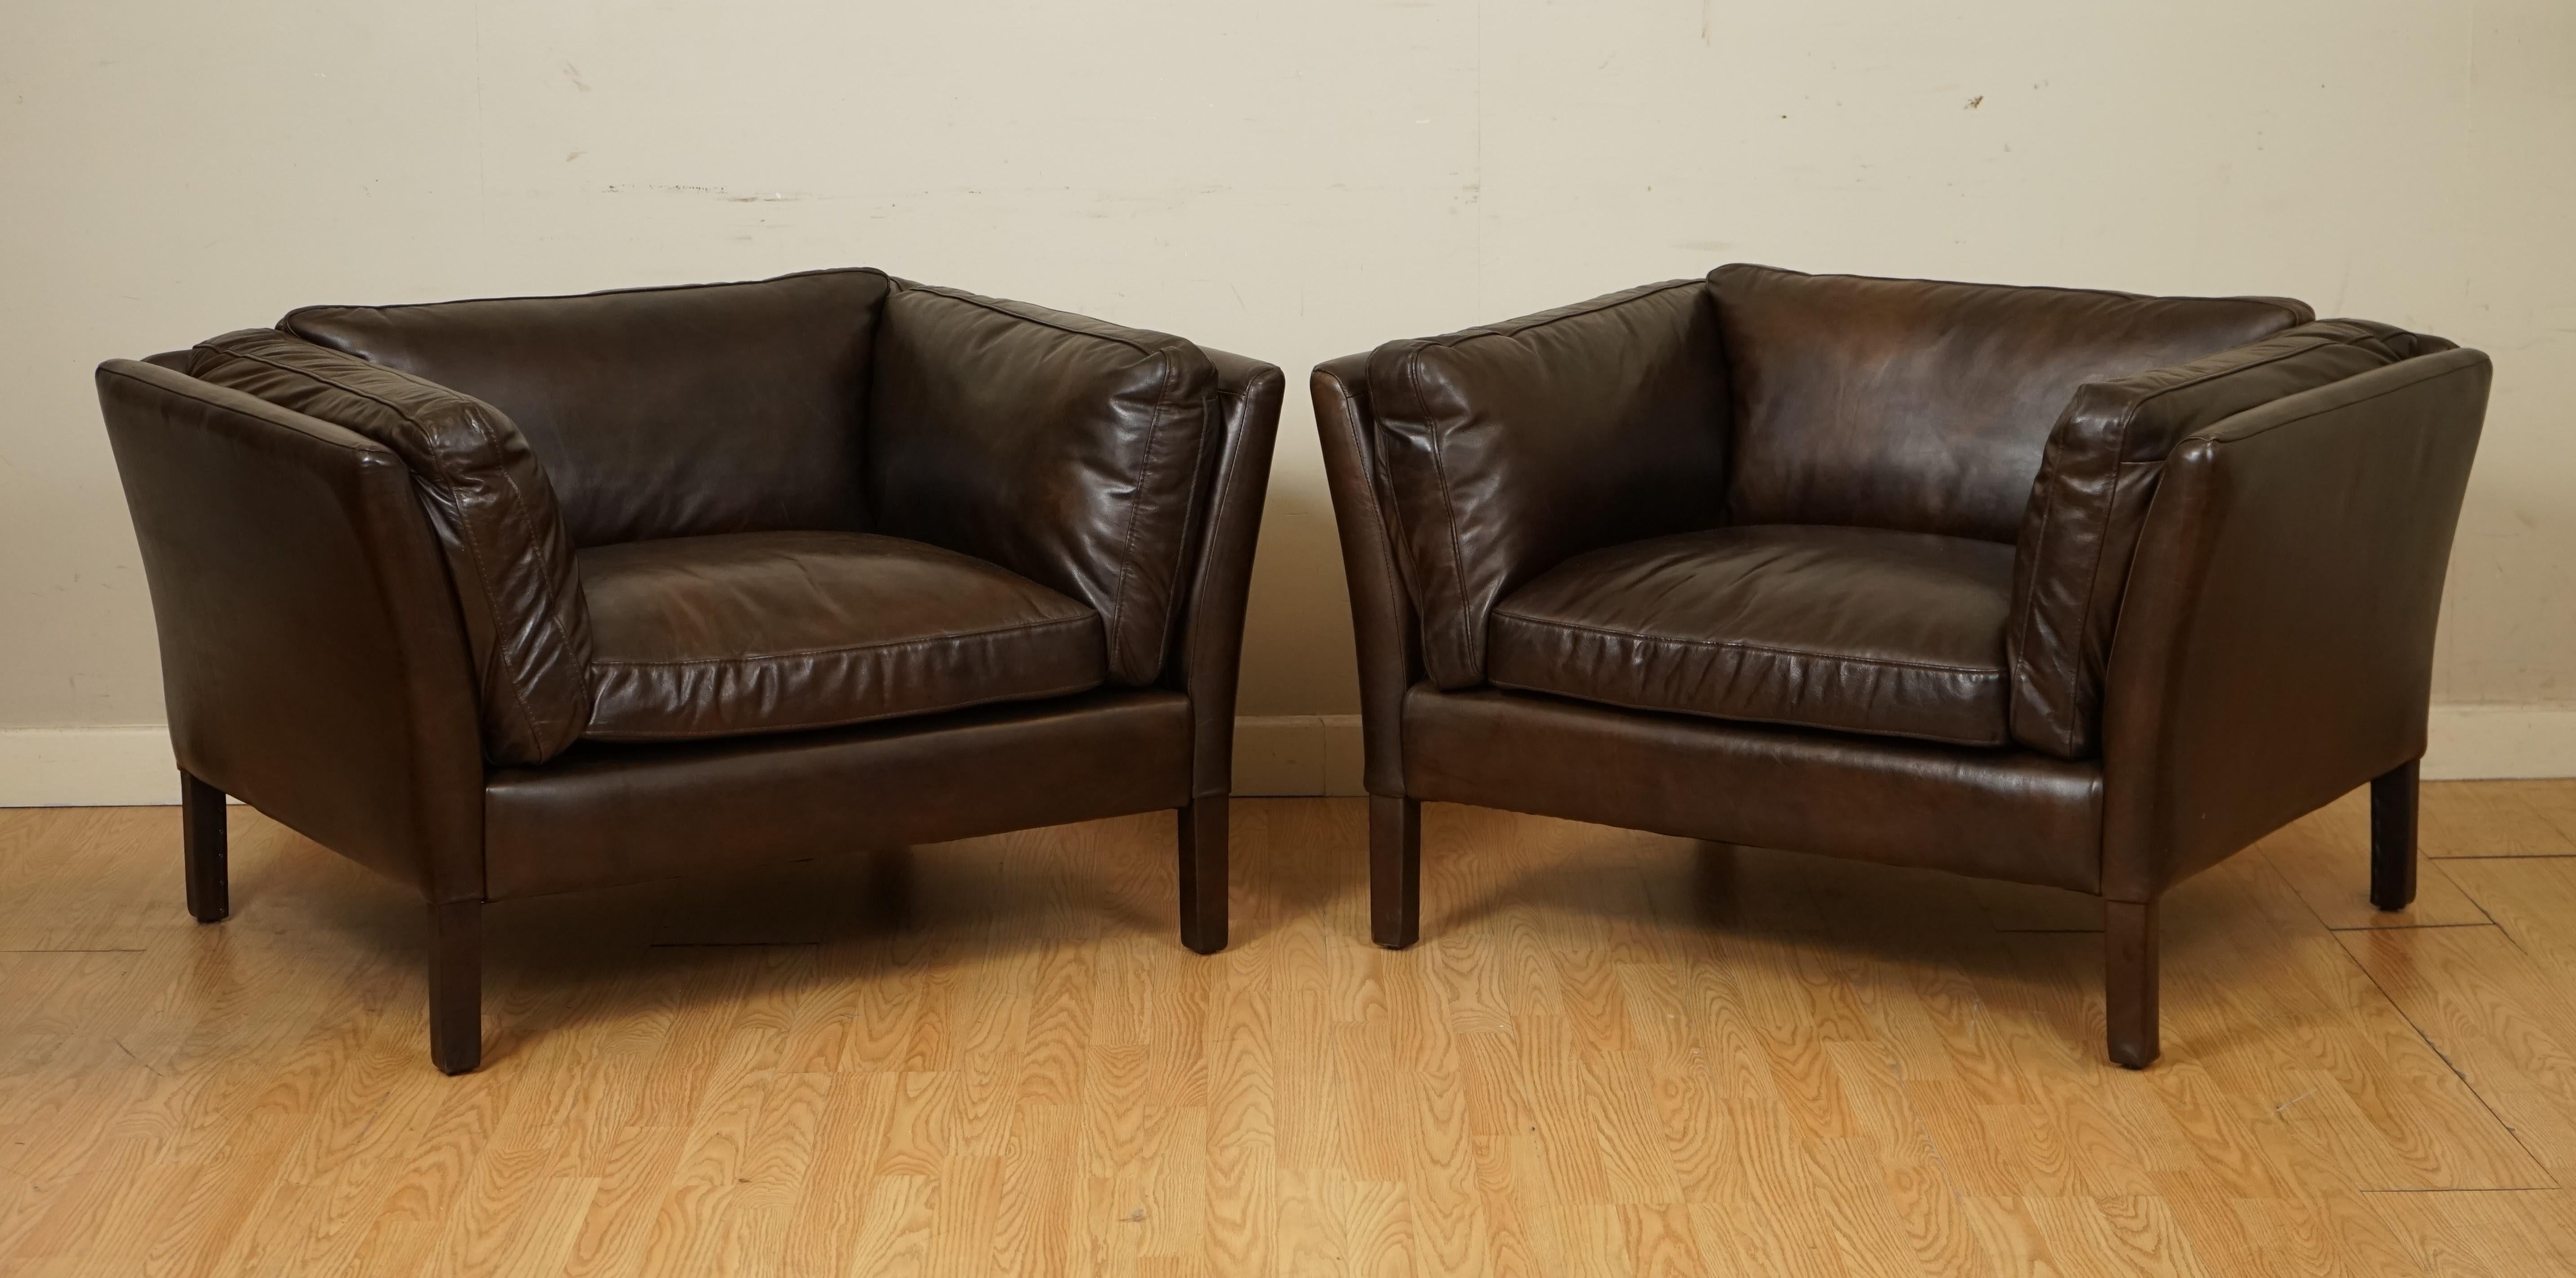 We are so excited to present to you this Pair of Halo Groucho Club Chairs in Biker Tan Colour.

This pair are in an almost like new condition, the leather is in a very good condition and the cushions are still nice and plump.

The seating and